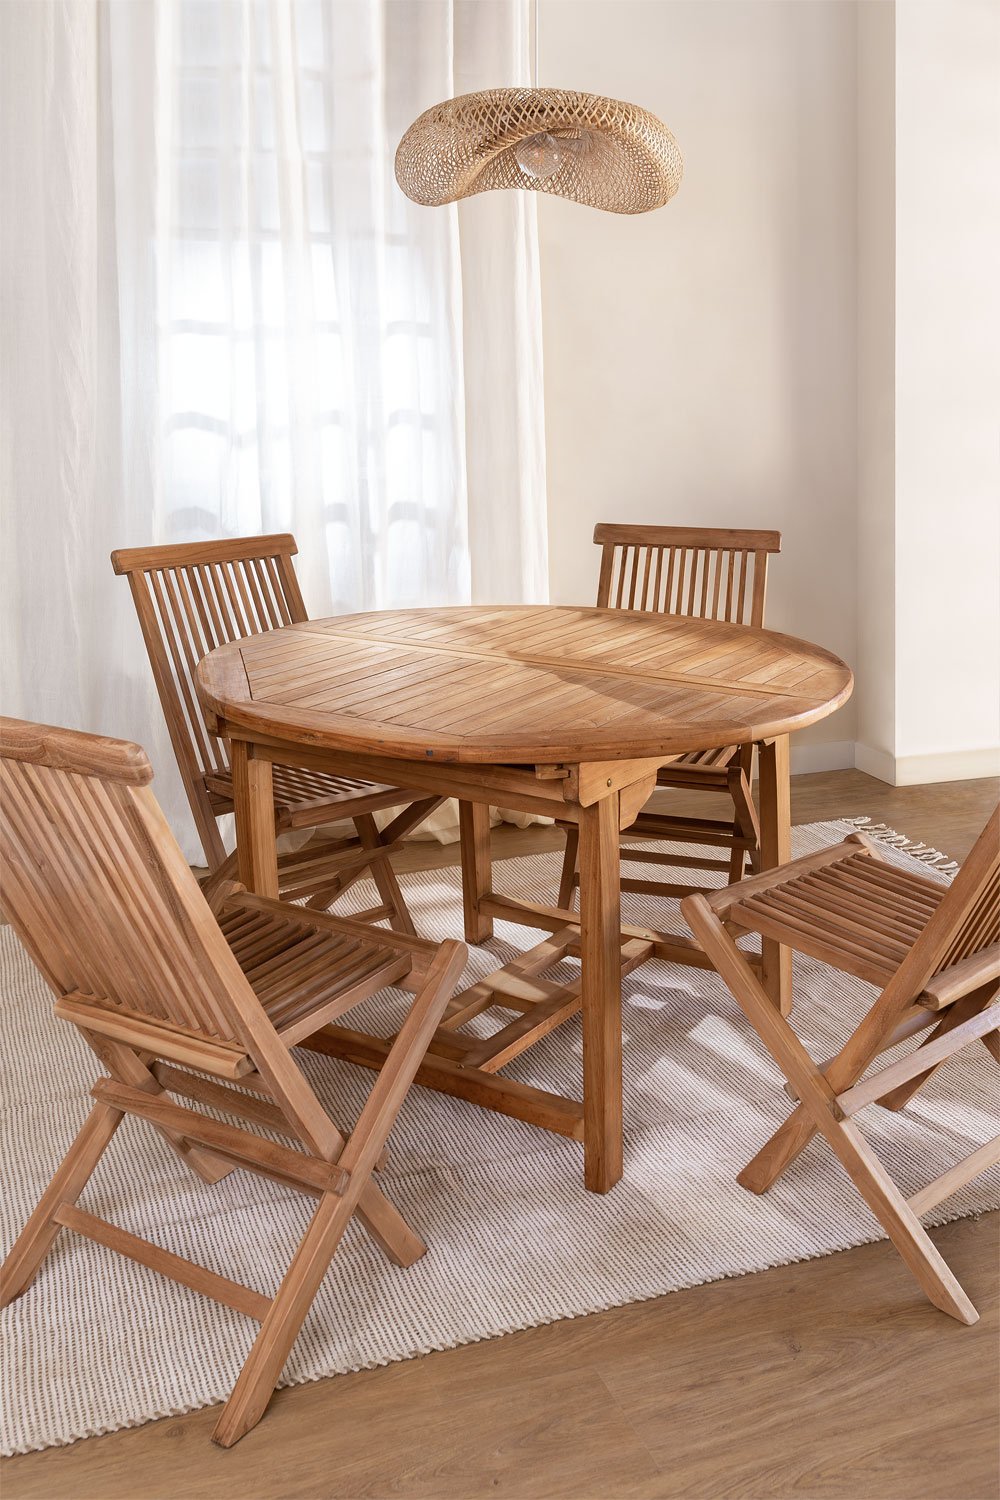 Set of 4 Foldable Teak Wood Chairs & Extendable Table (120-170 x 75 cm) Pira, gallery image 1